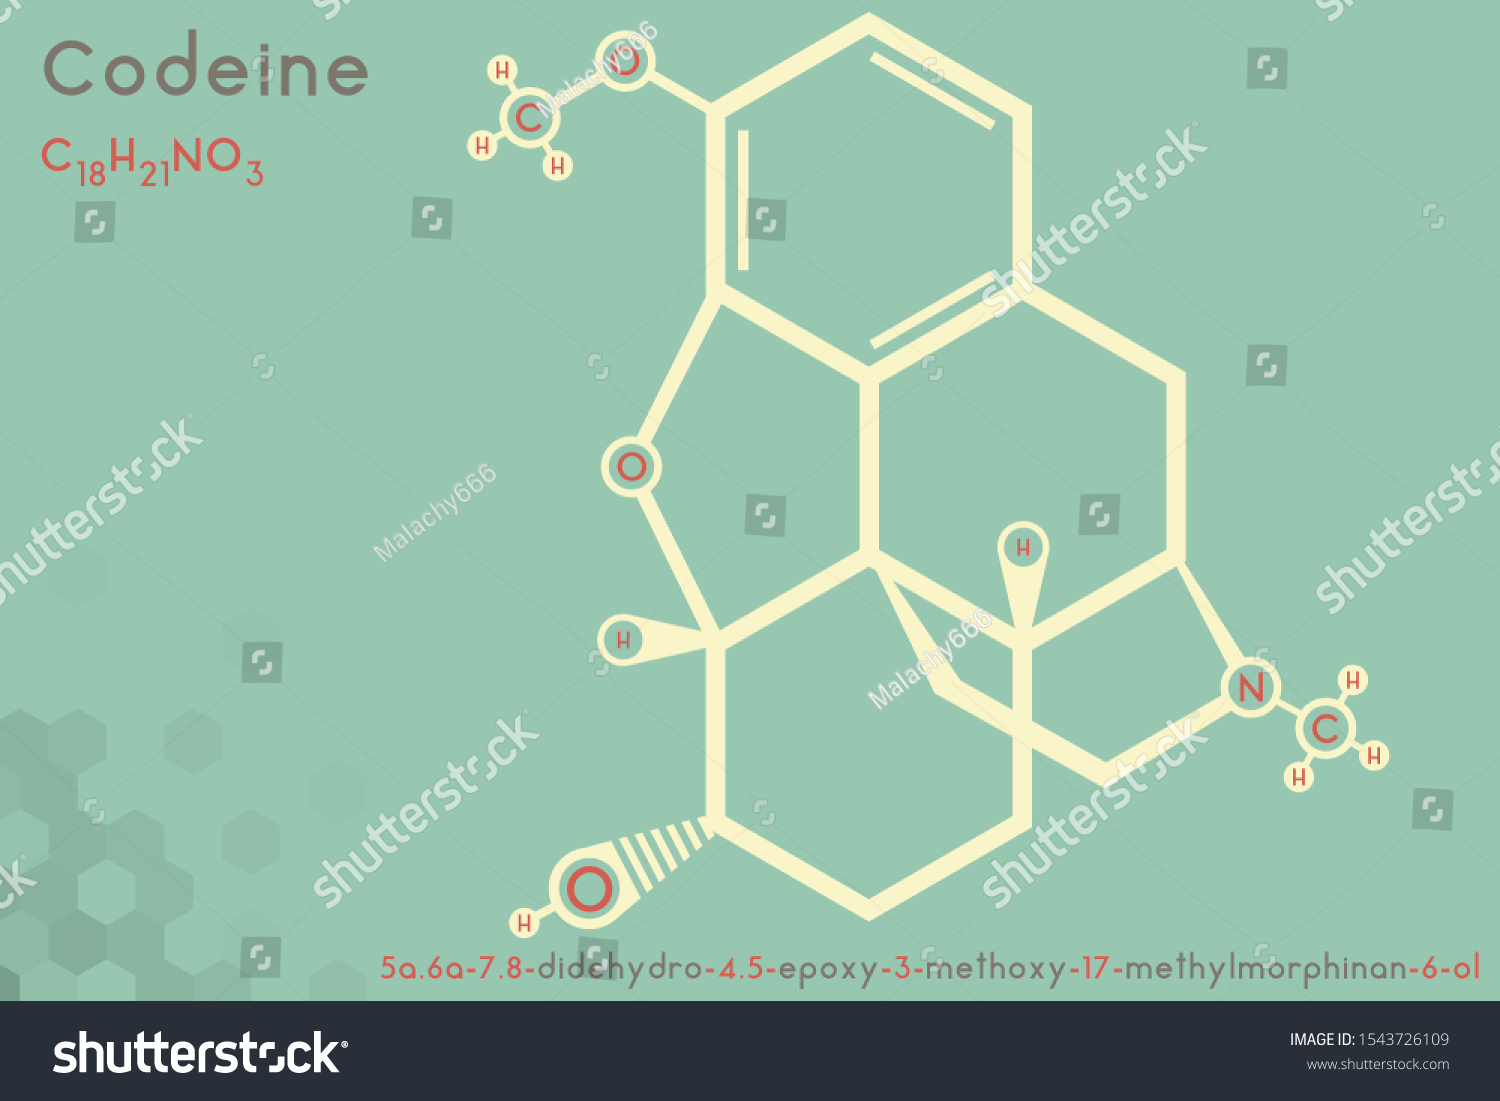 SVG of Large and detailed infographic of the molecule of Codeine. svg